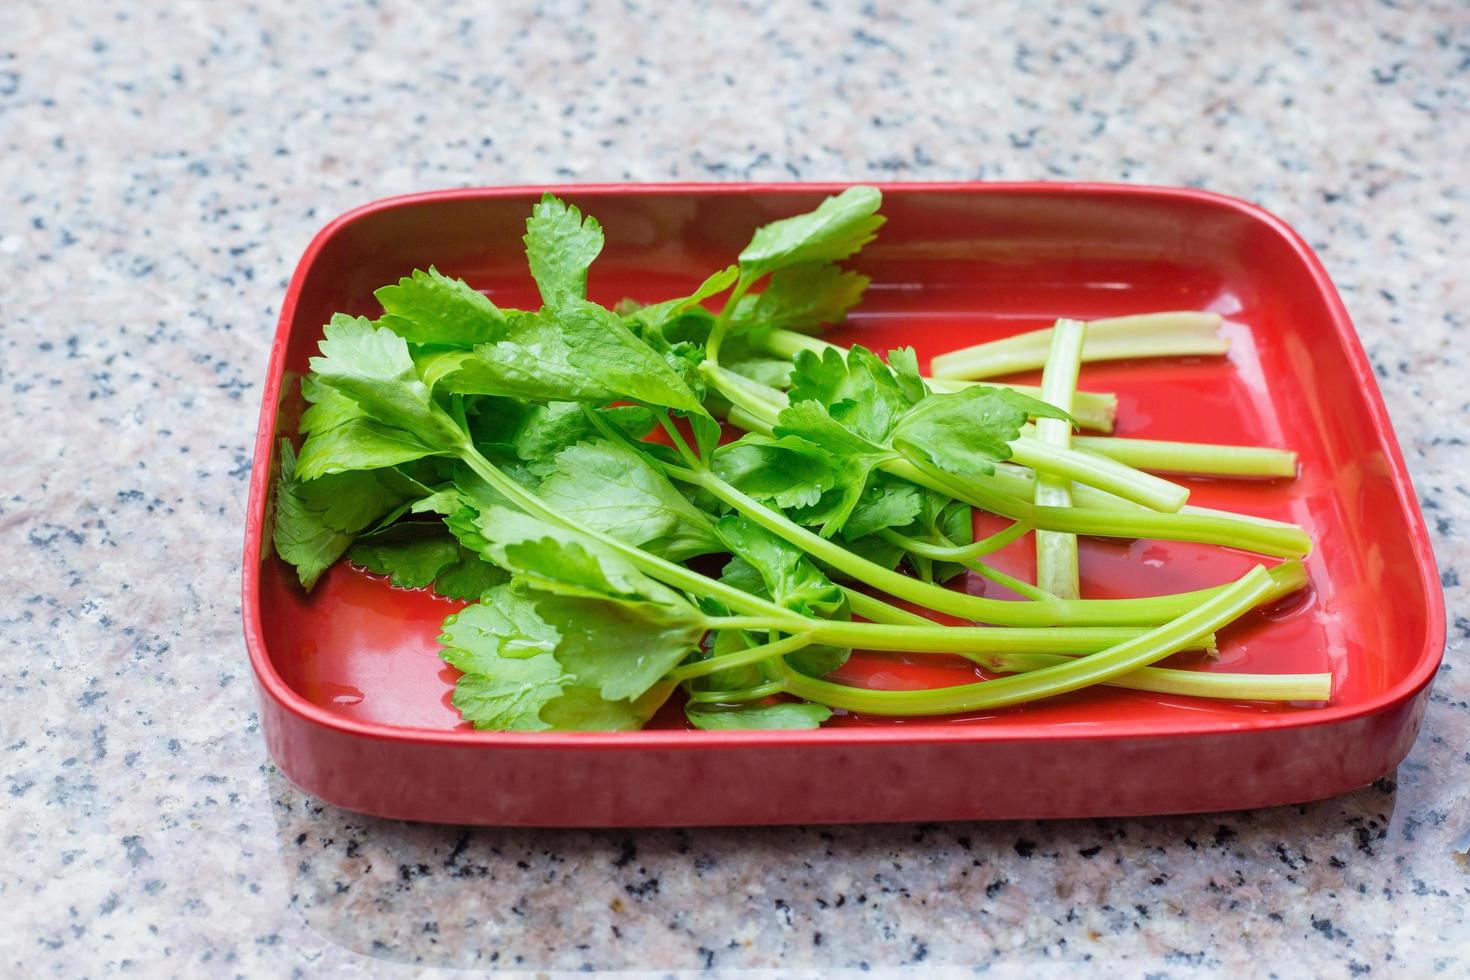 Fresh Celery was a vegetable which put on red plate and served in Shabu Sukiyaki restaurant. photo